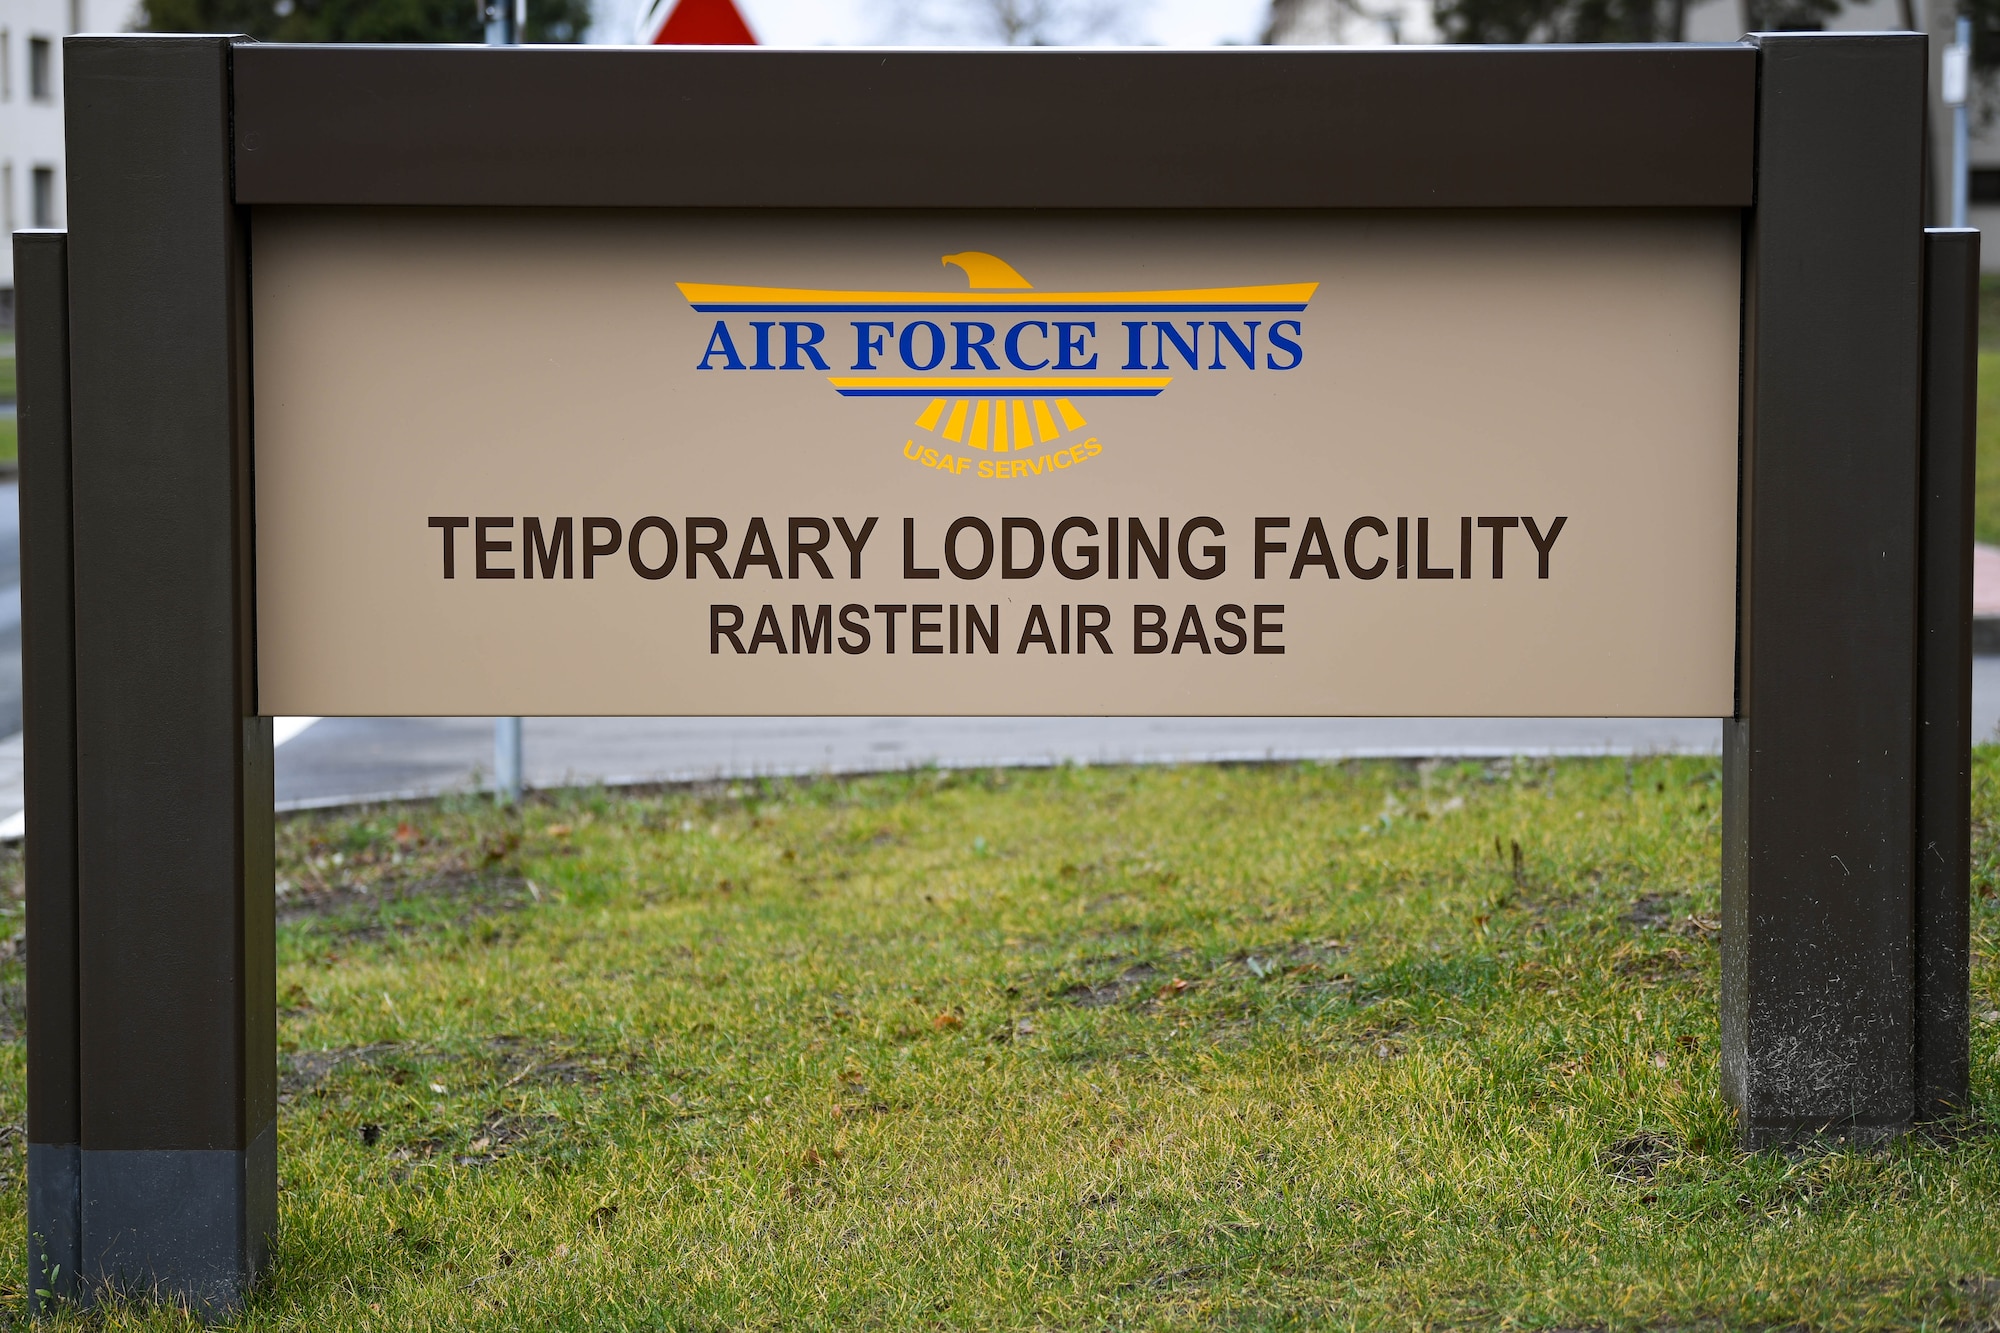 A sign for a new temporary lodging facility is displayed at Ramstein Air Base, Germany, Feb. 23, 2022. In addition to providing more lodging for PCSing families, the TLF increases Ramstein’s ability to host transit personnel and temporarily deployed units on the installation. (U.S. Air Force photo by Airman 1st Class Jared Lovett)